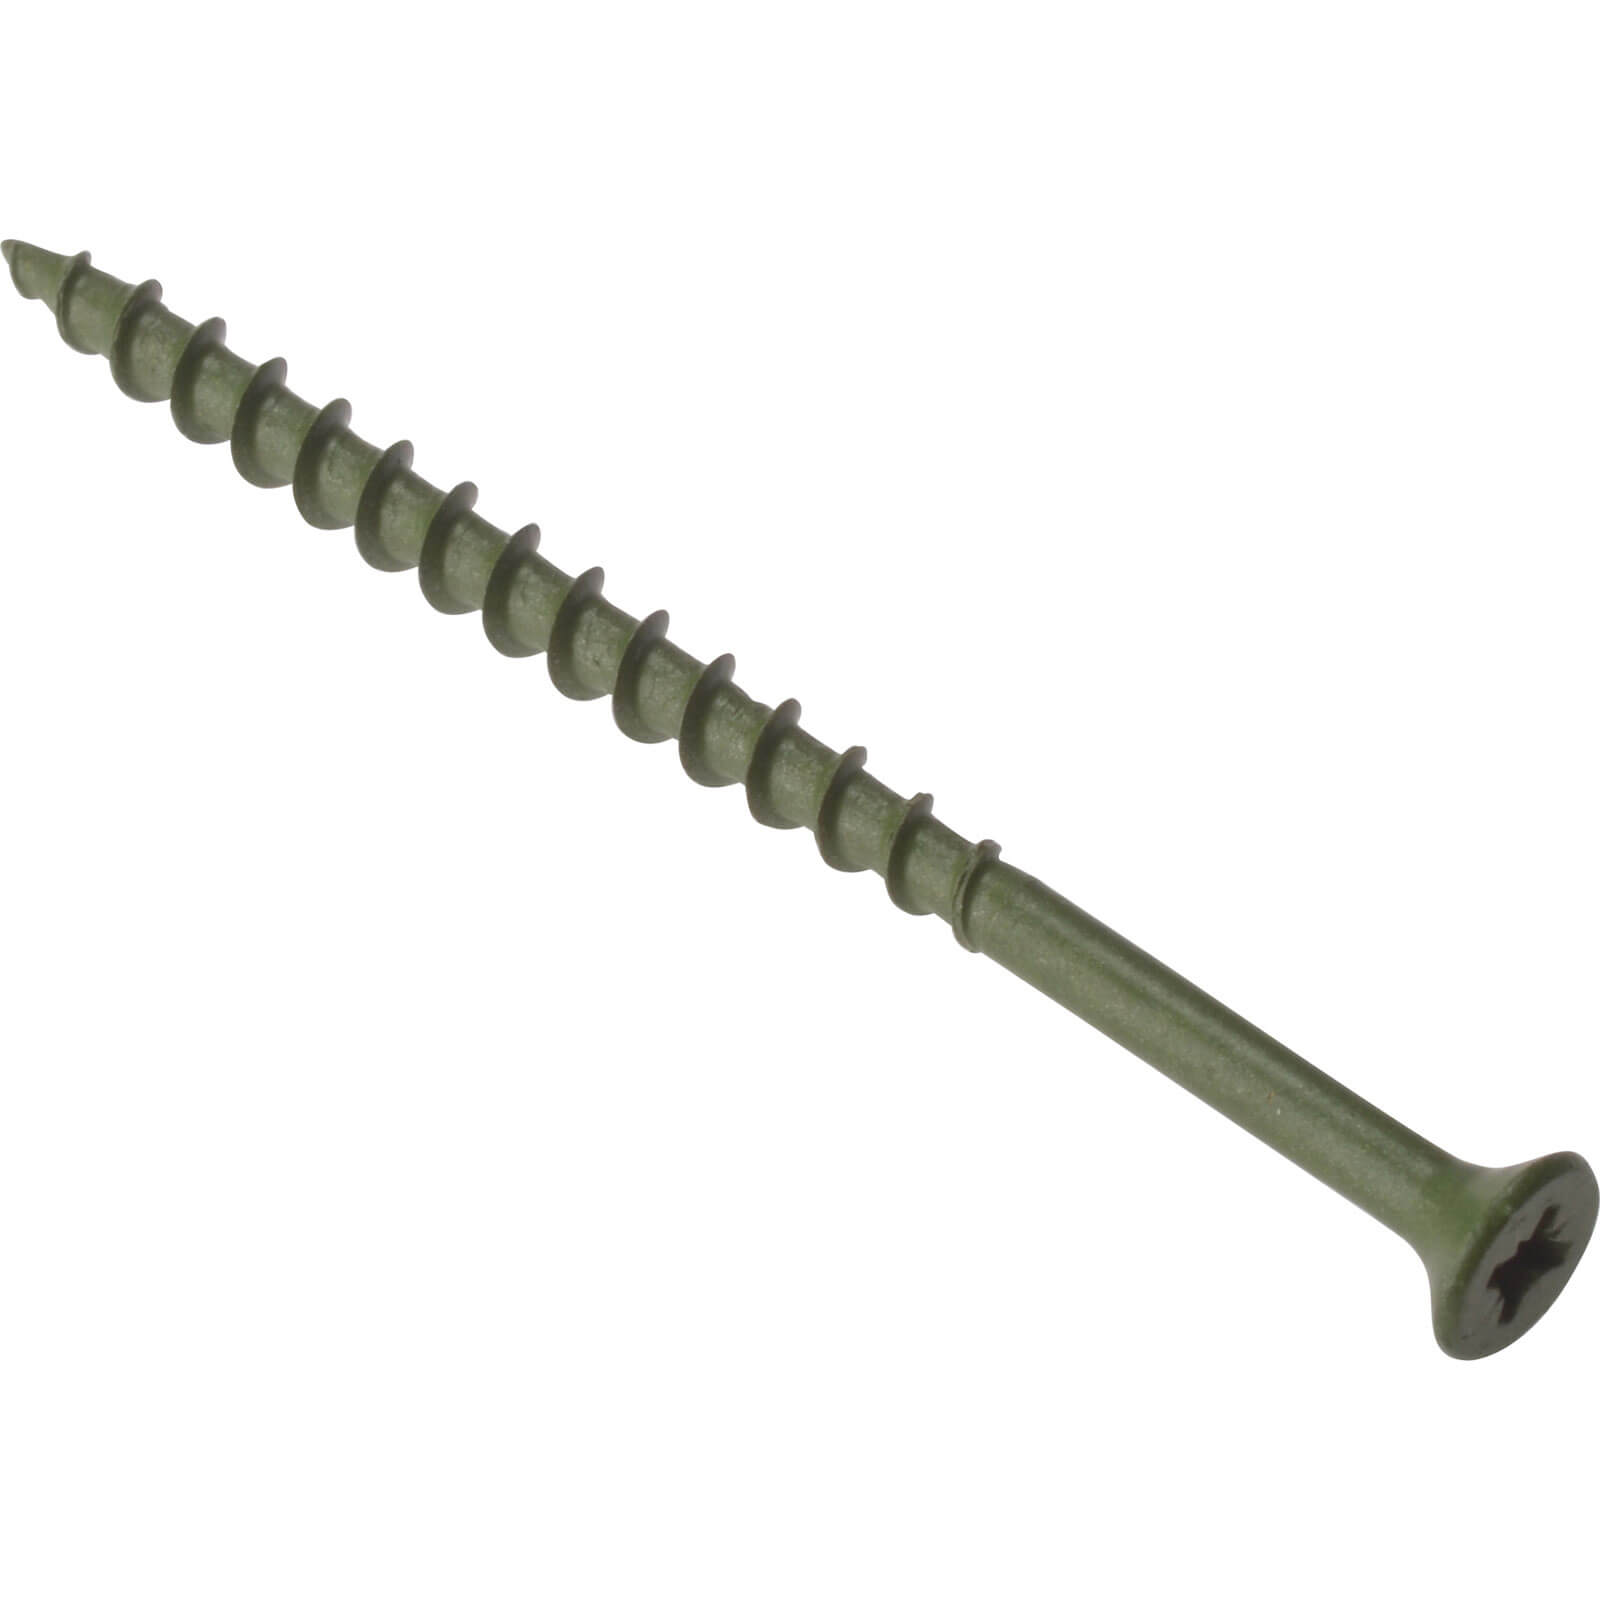 Image of ForgeFix Decking Screw Pozi ST Green Anti-Corrosion Treated 4.5mm 50mm Pack of 1000